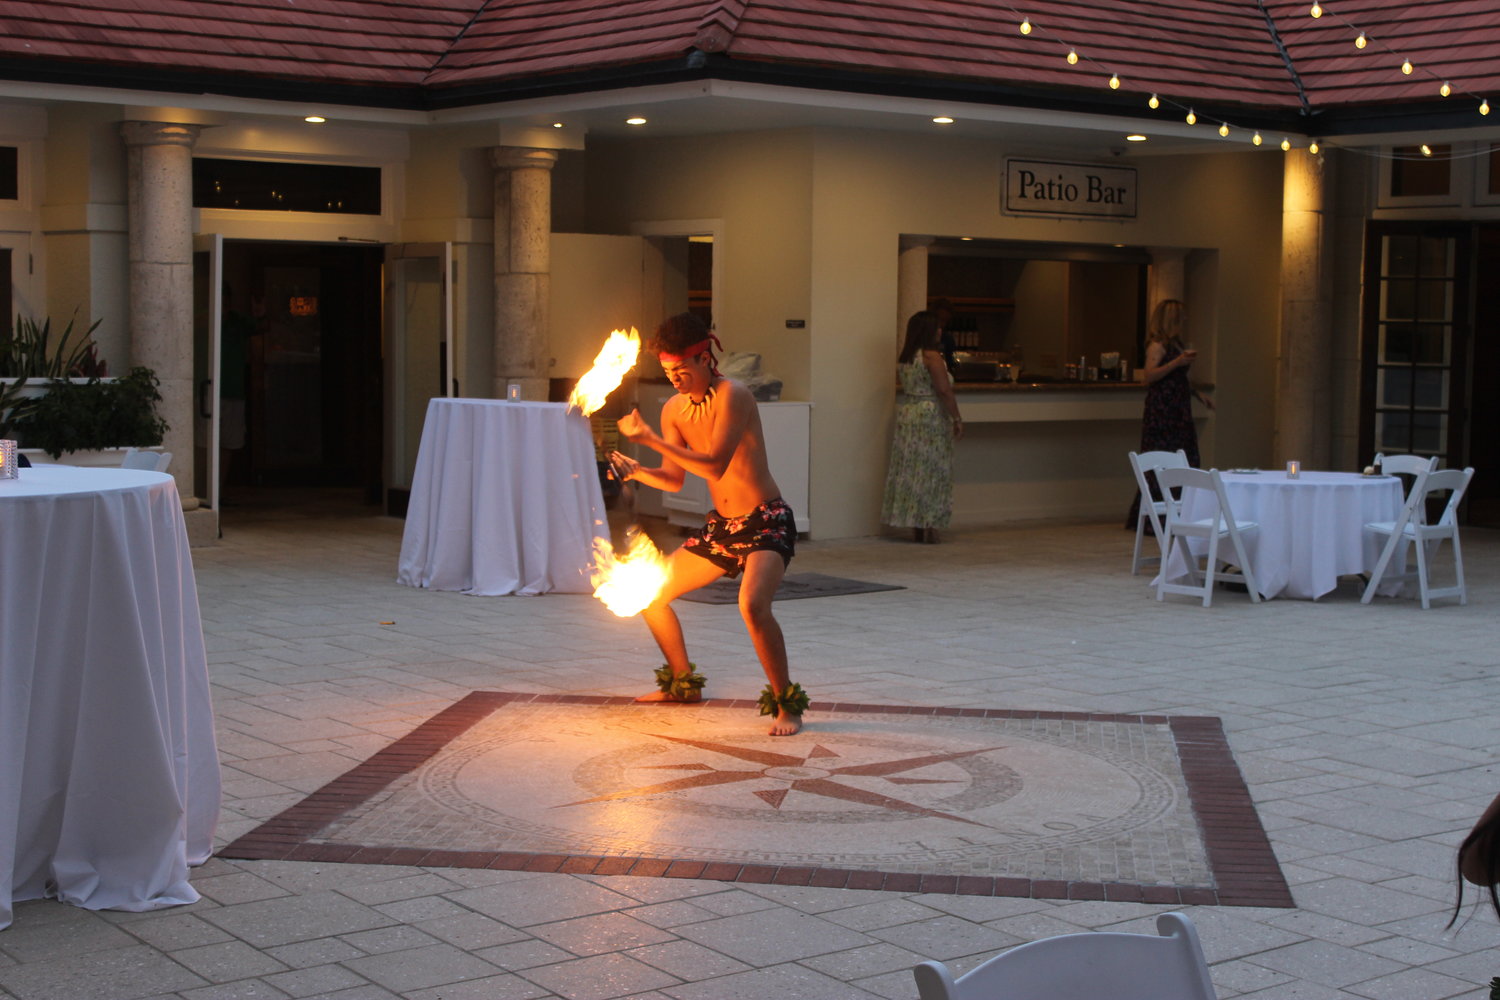 The entertainment for the Hawaiian-themed event included a fire dance.